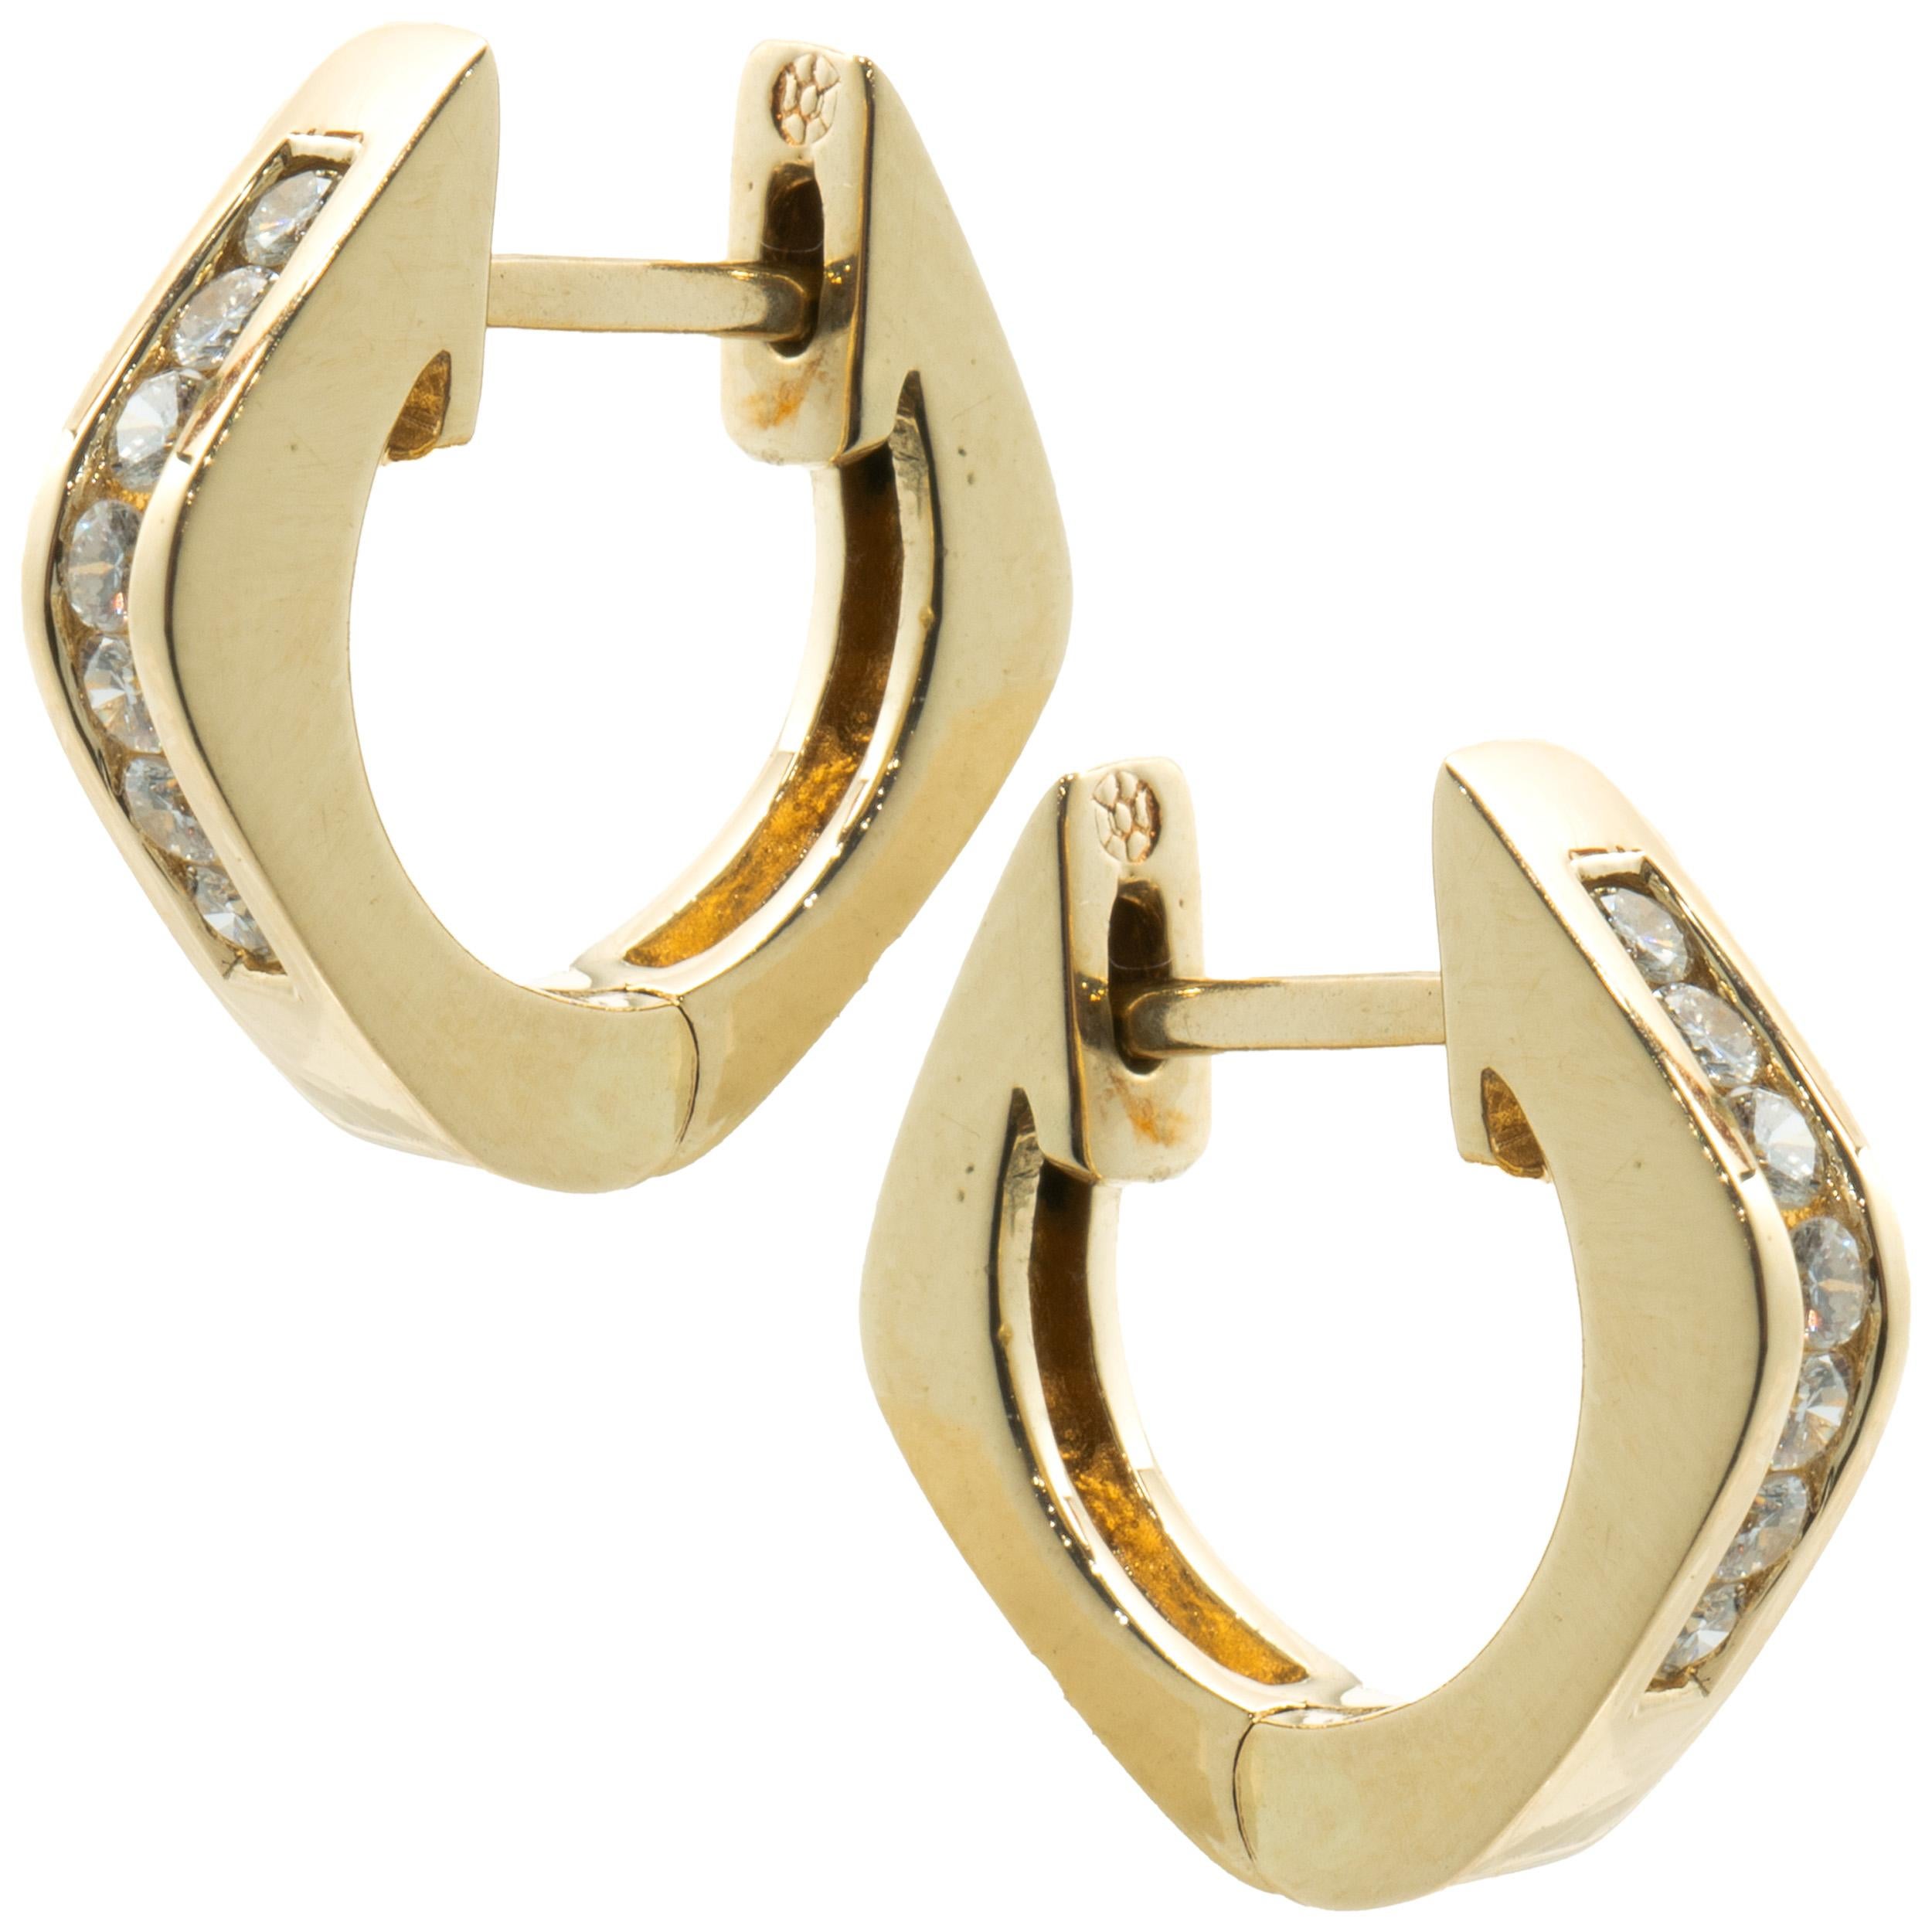 Material: 14k yellow Gold
Diamonds: 14 round brilliant cut = 0.21cttw
Color: H
Clarity: SI1-2
Dimensions: earrings measure approximately 5/8” in diameter
Fastenings: snapbacks
Weight: 3.95 grams
